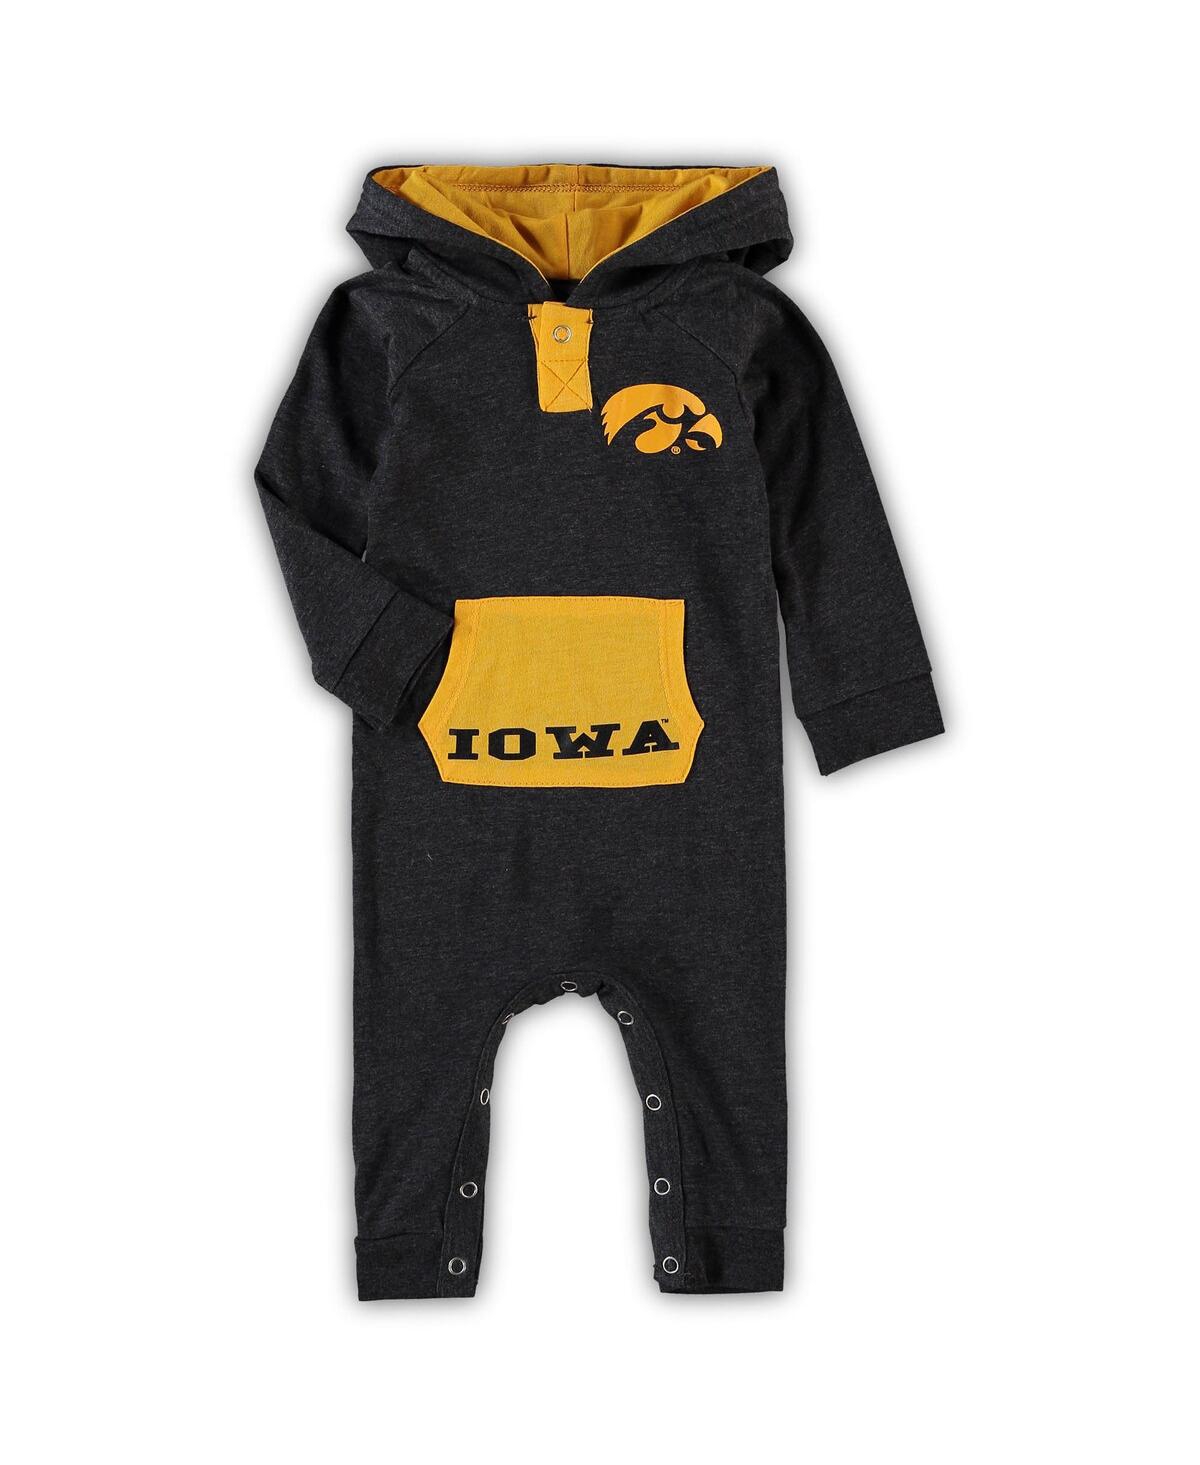 Shop Colosseum Newborn And Infant Boys And Girls  Black Iowa Hawkeyes Henry Pocketed Hoodie Romper